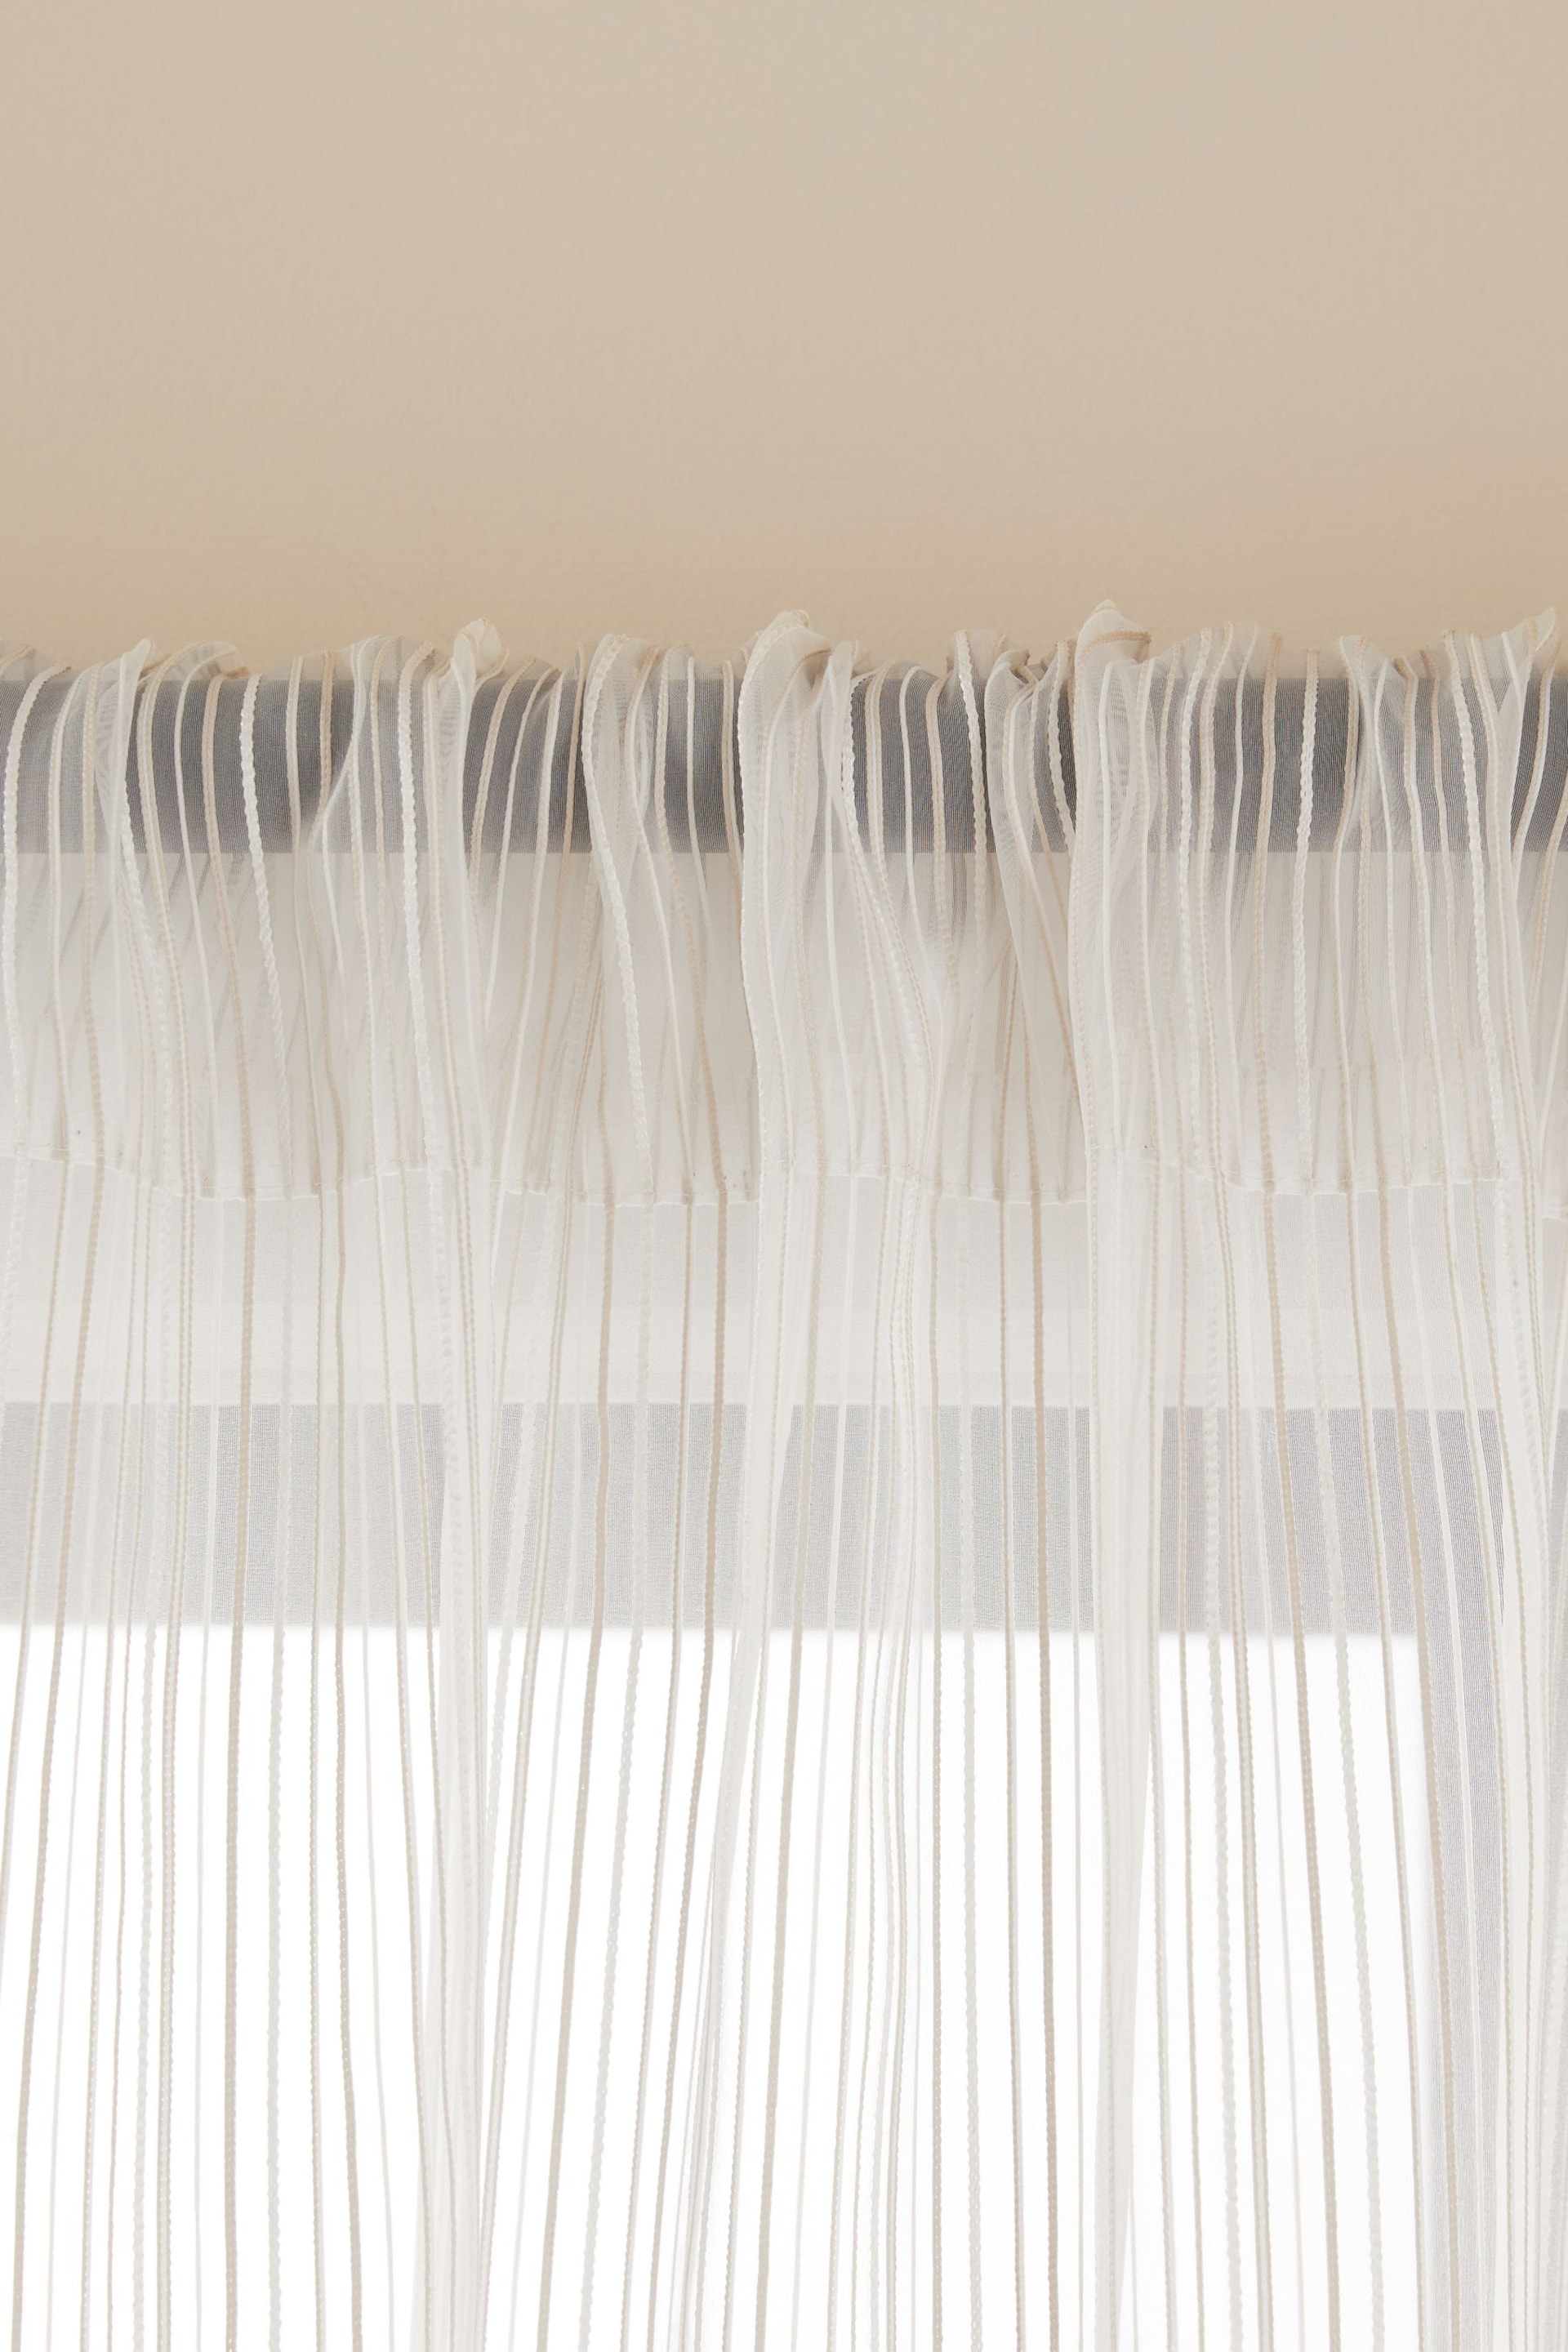 Natural Stripe Voile Slot Top Unlined Sheer Panel Curtain - Image 5 of 7